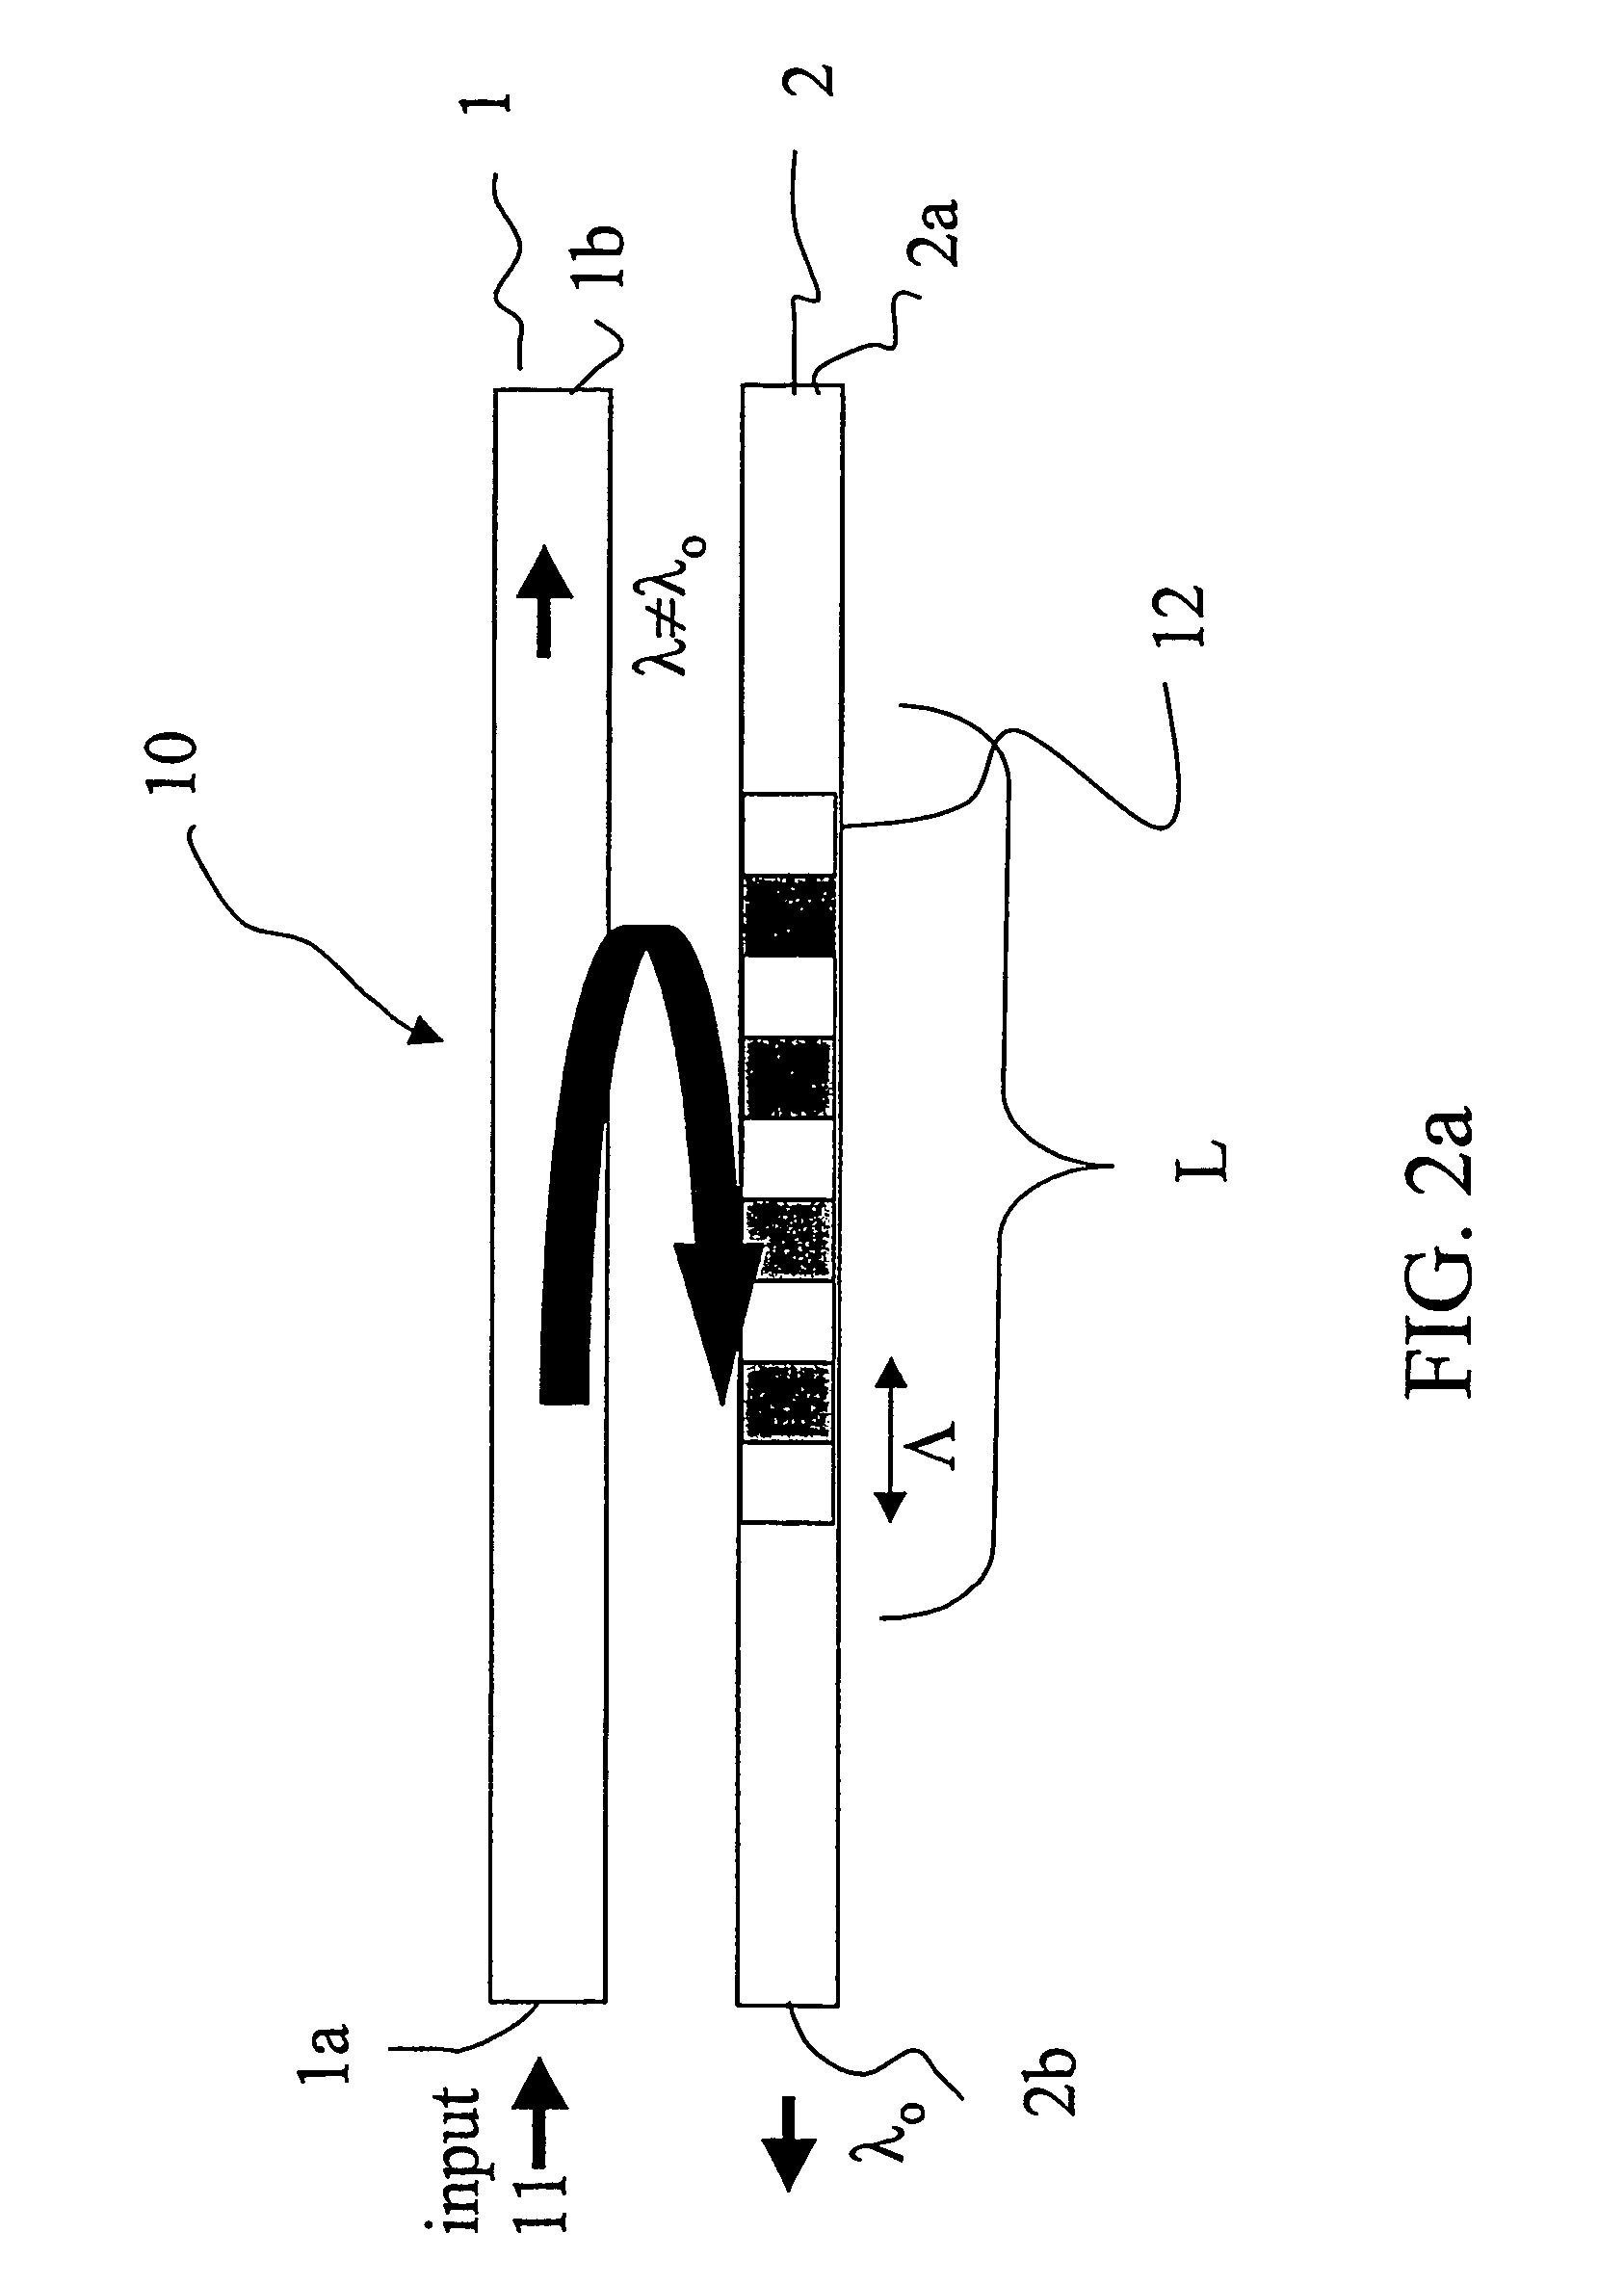 Tuneable grating assisted directional optical coupler